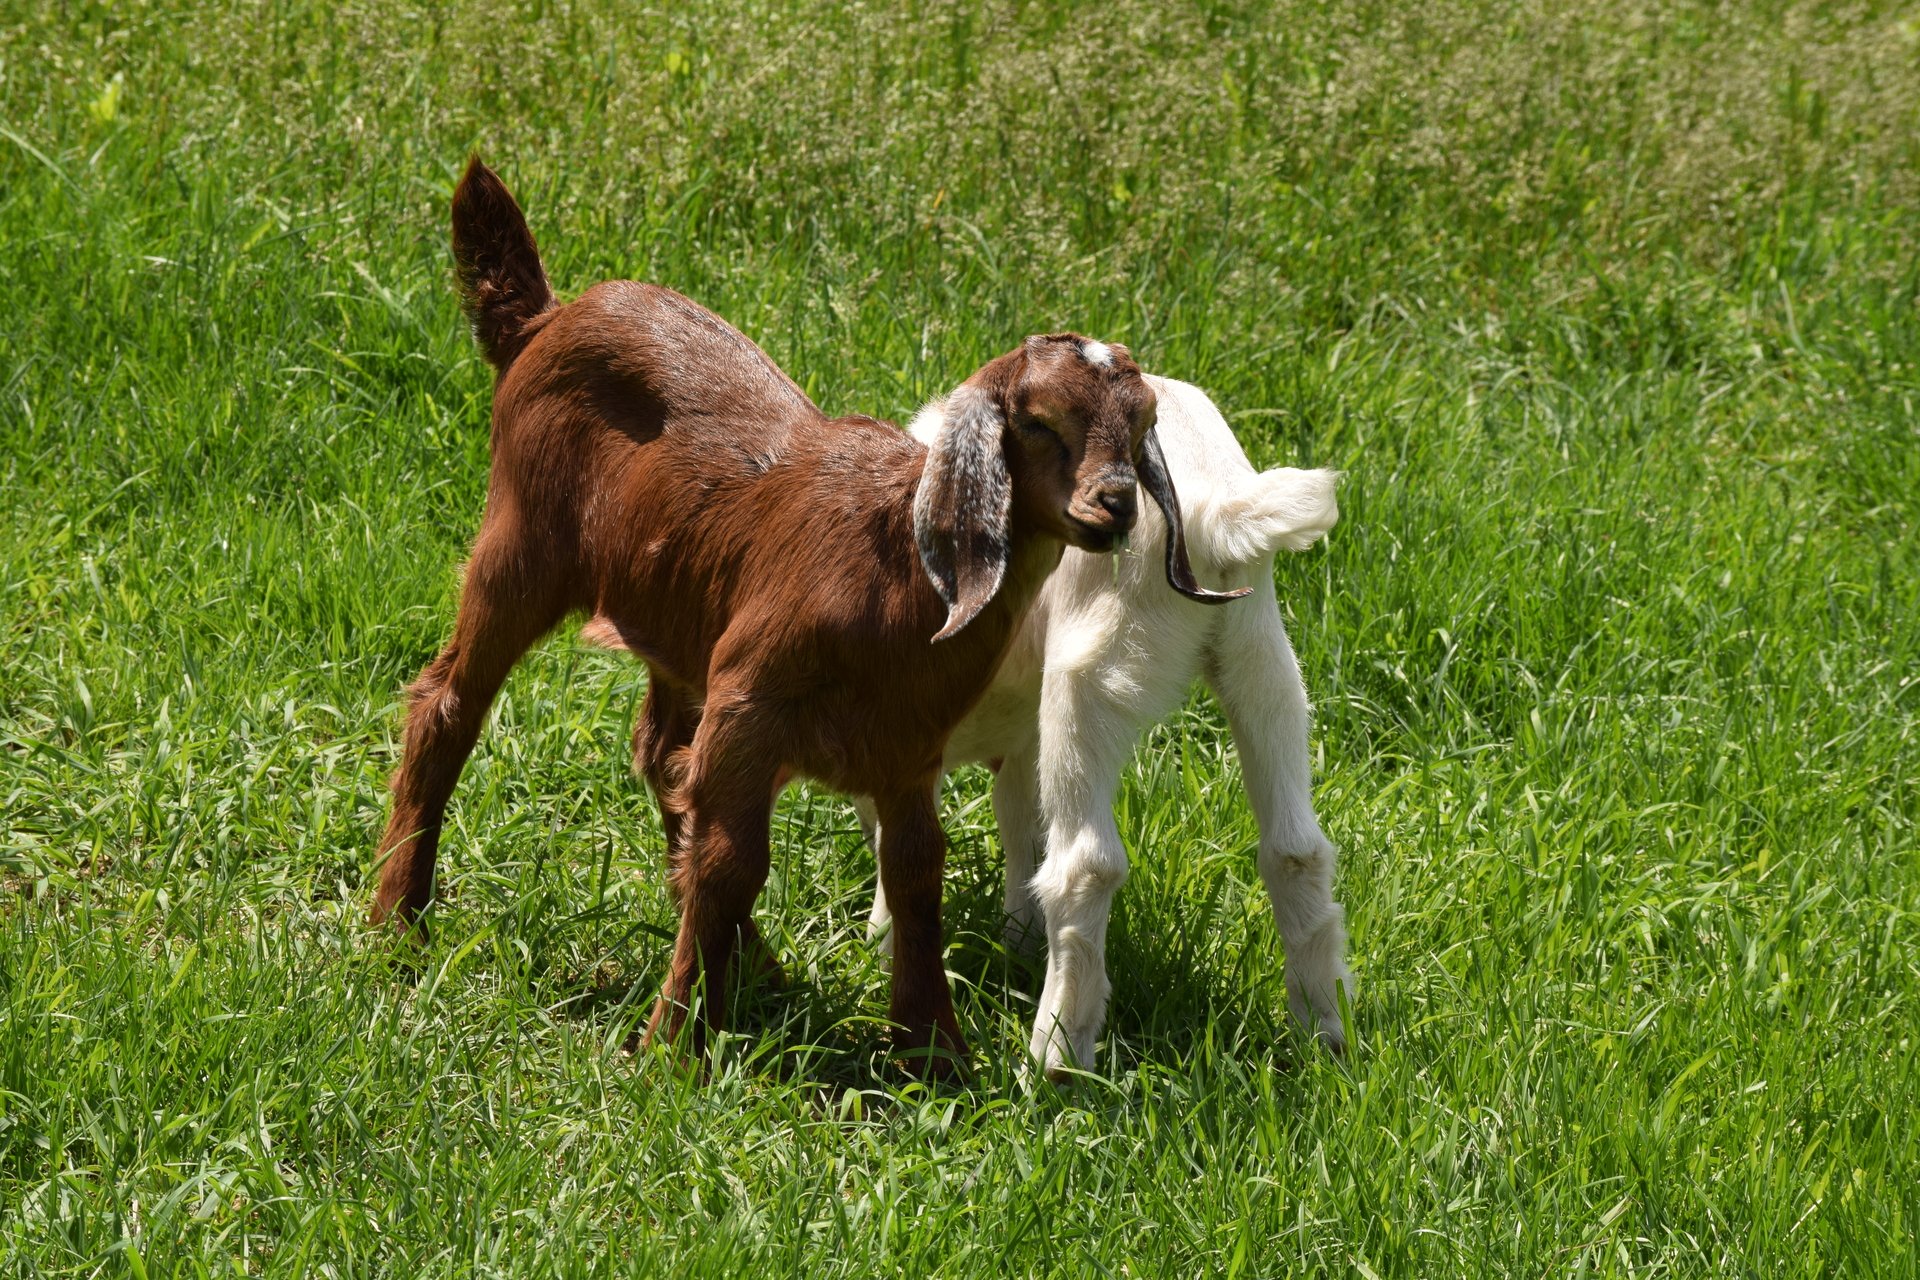 A brown baby goat stand in front of a white baby goat in green grass.